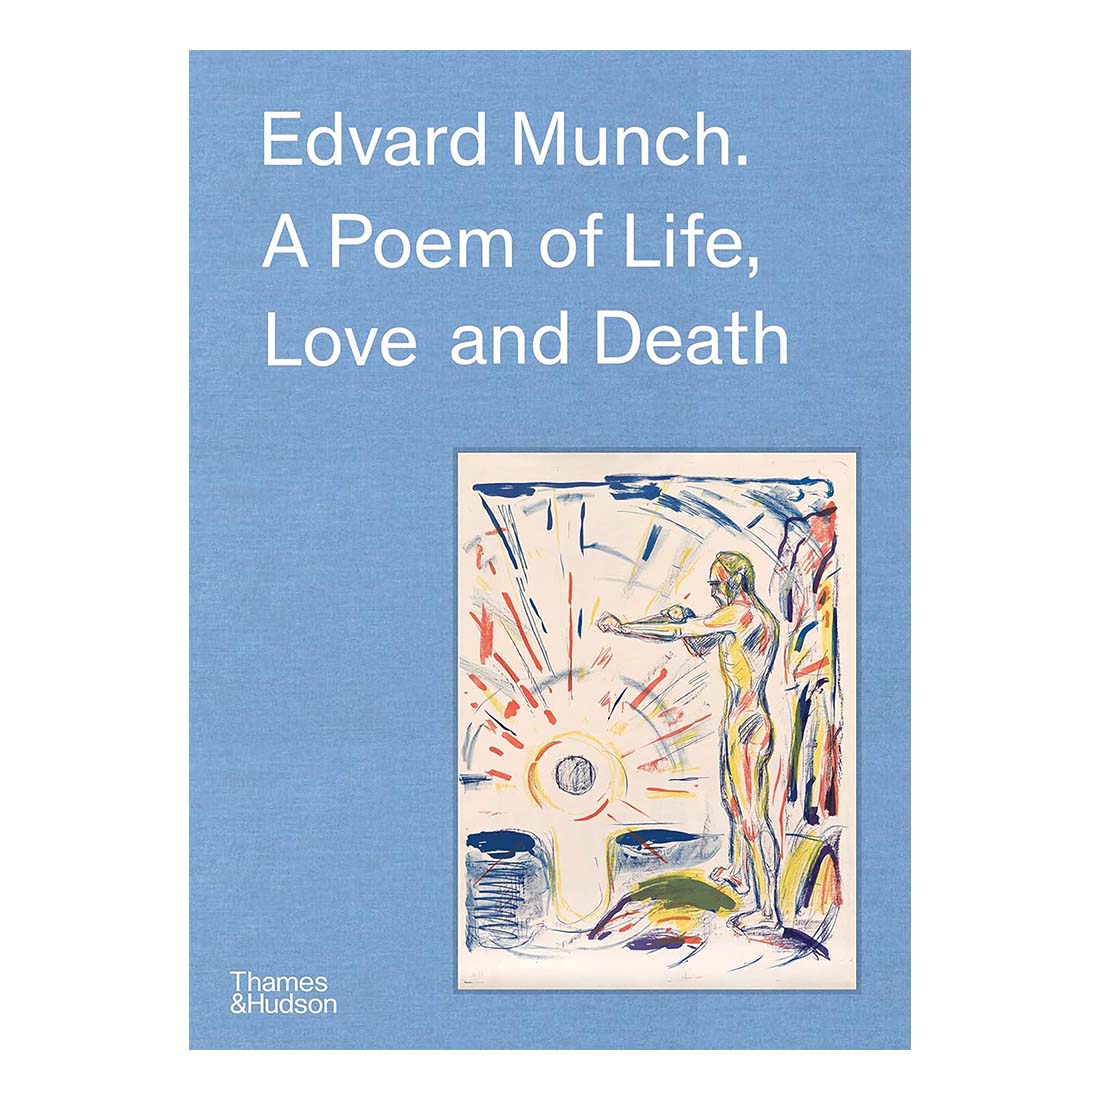 Edvard Munch: A Poem of Live, Love and Death